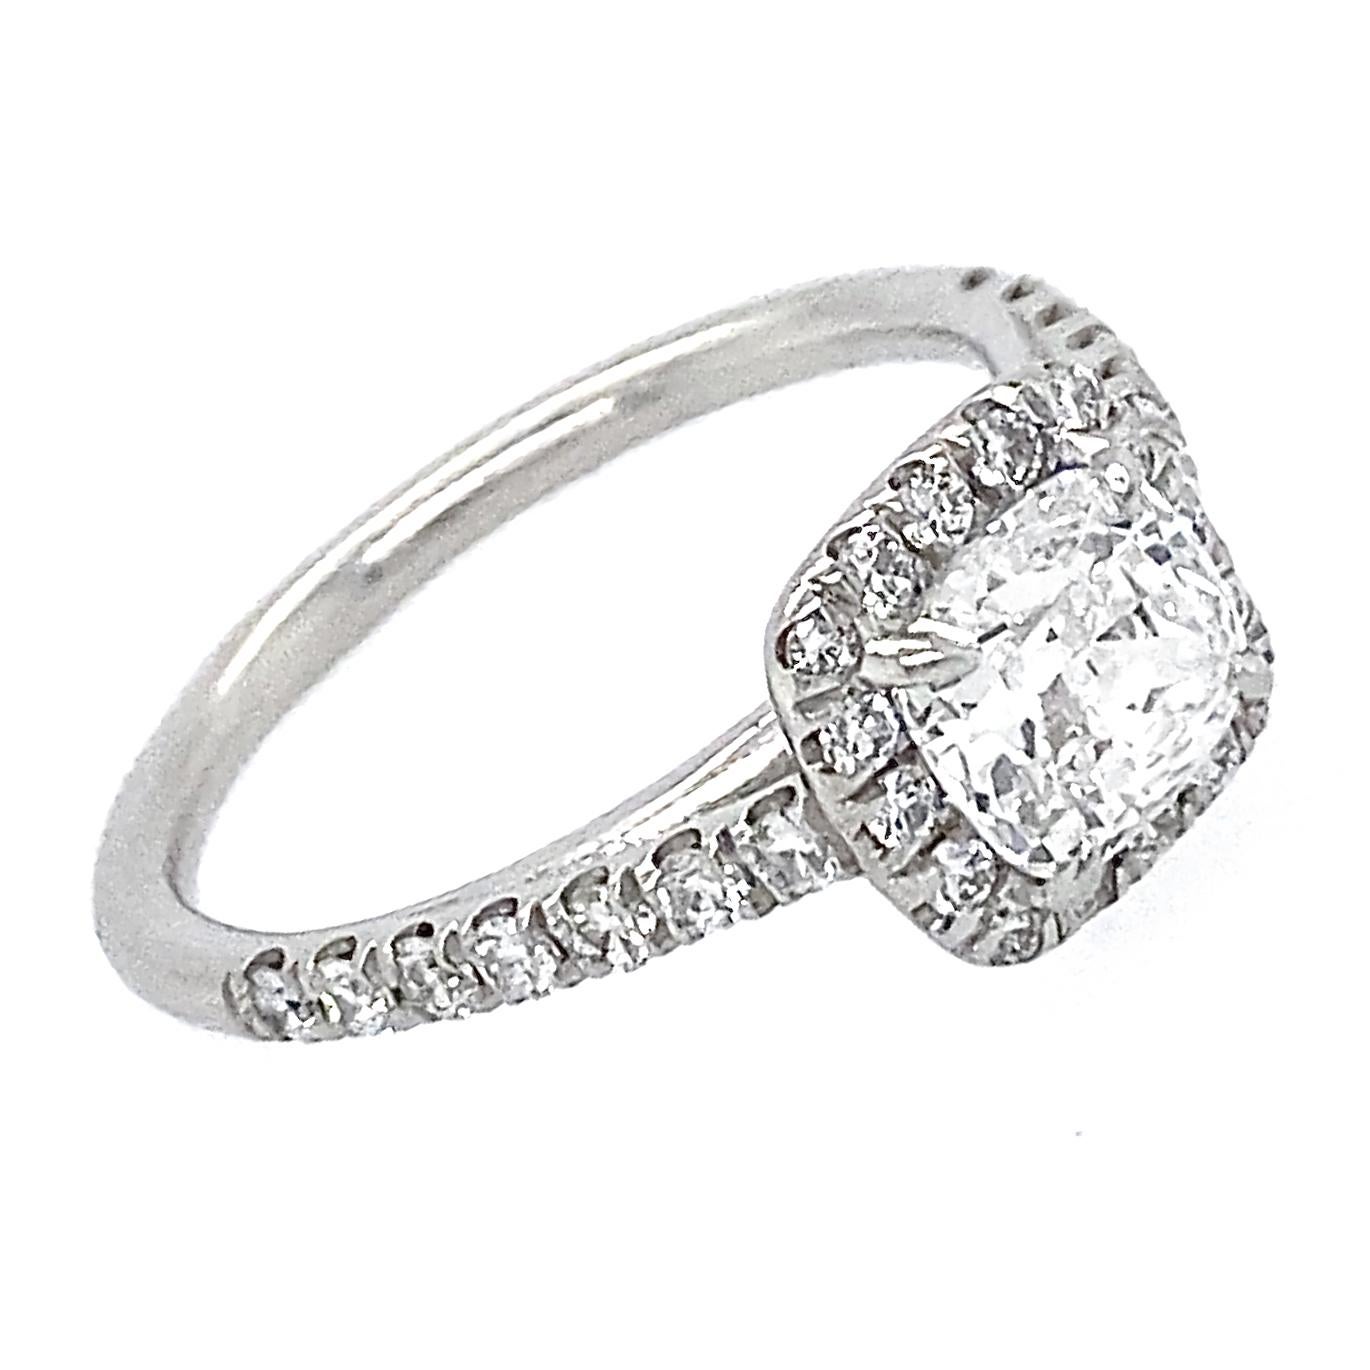 Contemporary Certified D Colorless 1.01 Carat Diamond Cushion in Platinum Engagement Ring For Sale